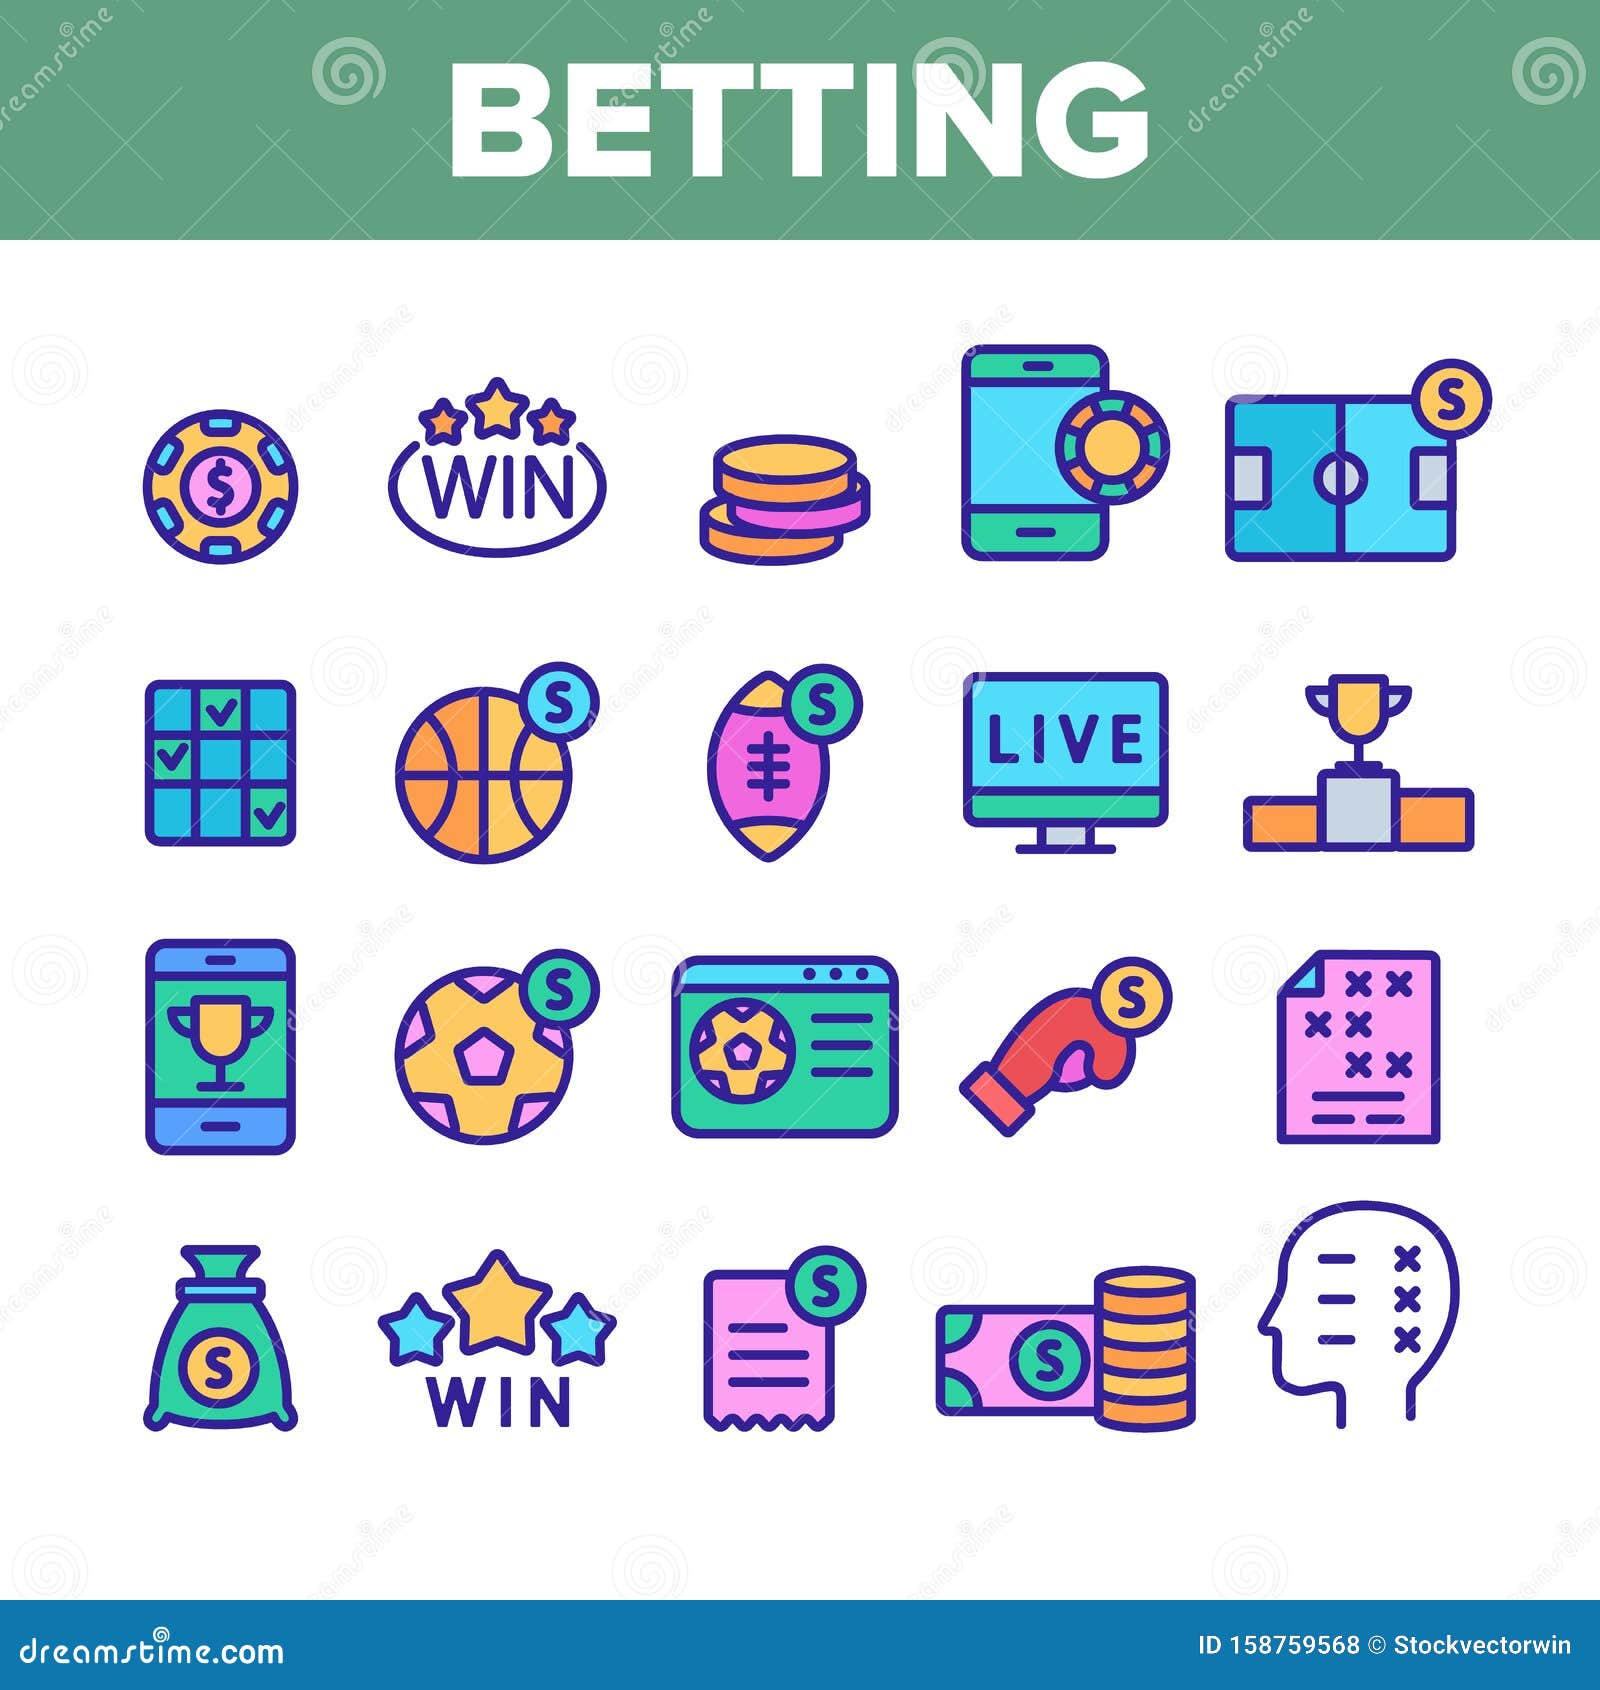 Betting Football Game Color Vector Icons Set Stock Vector - Illustration of business, collection ...